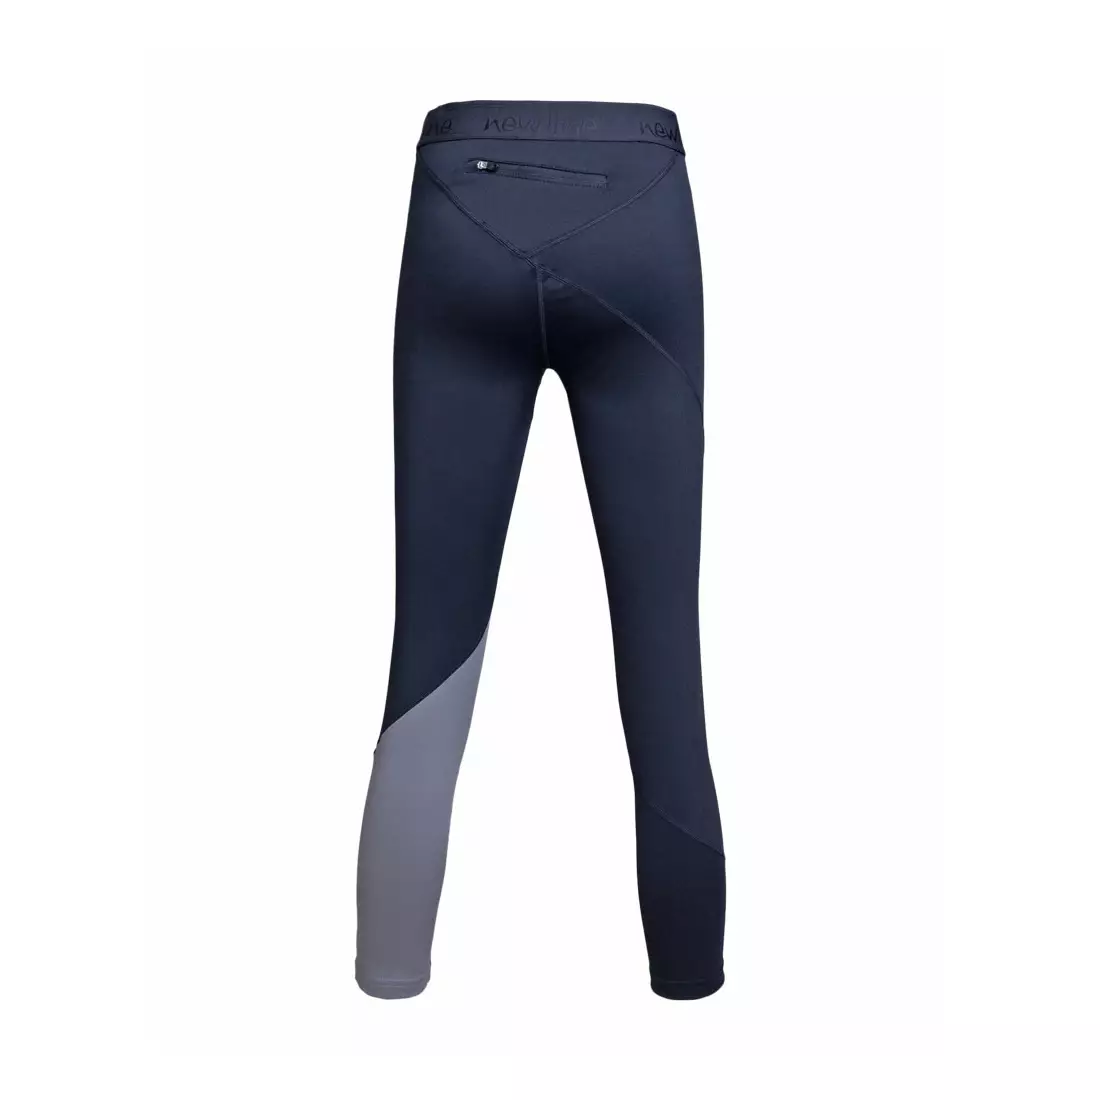 NEWLINE IMOTION 3/4 TIGHTS 10298-275 - women's 3/4 running shorts, color: navy blue